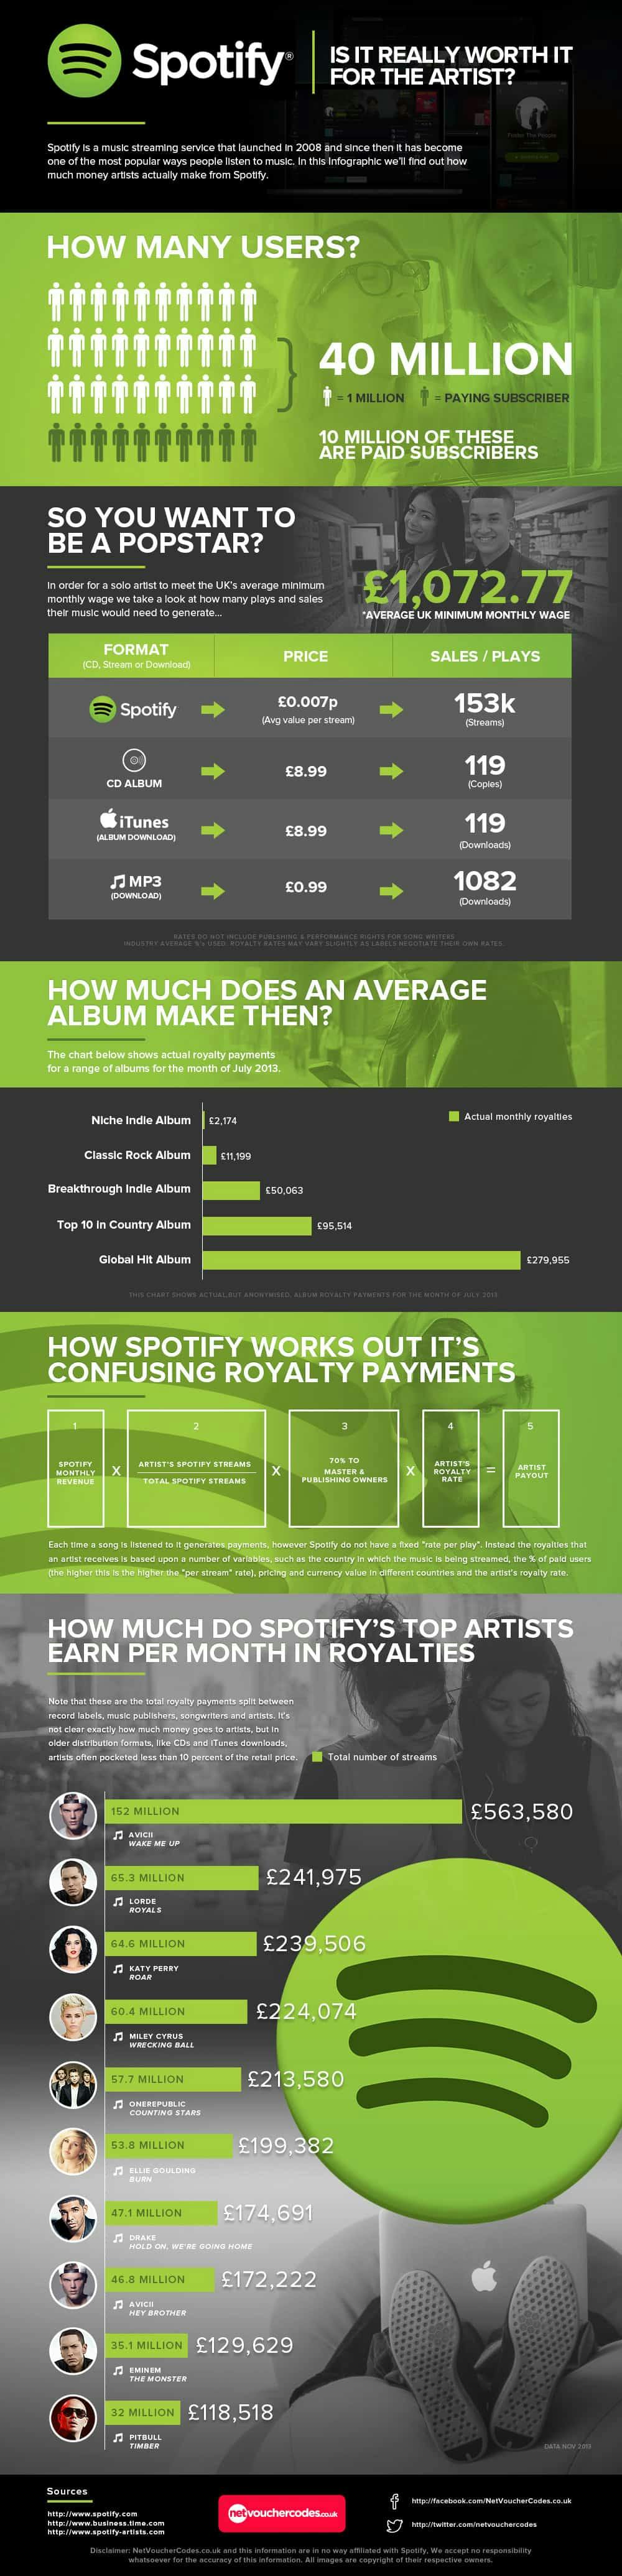 spotify_infographic